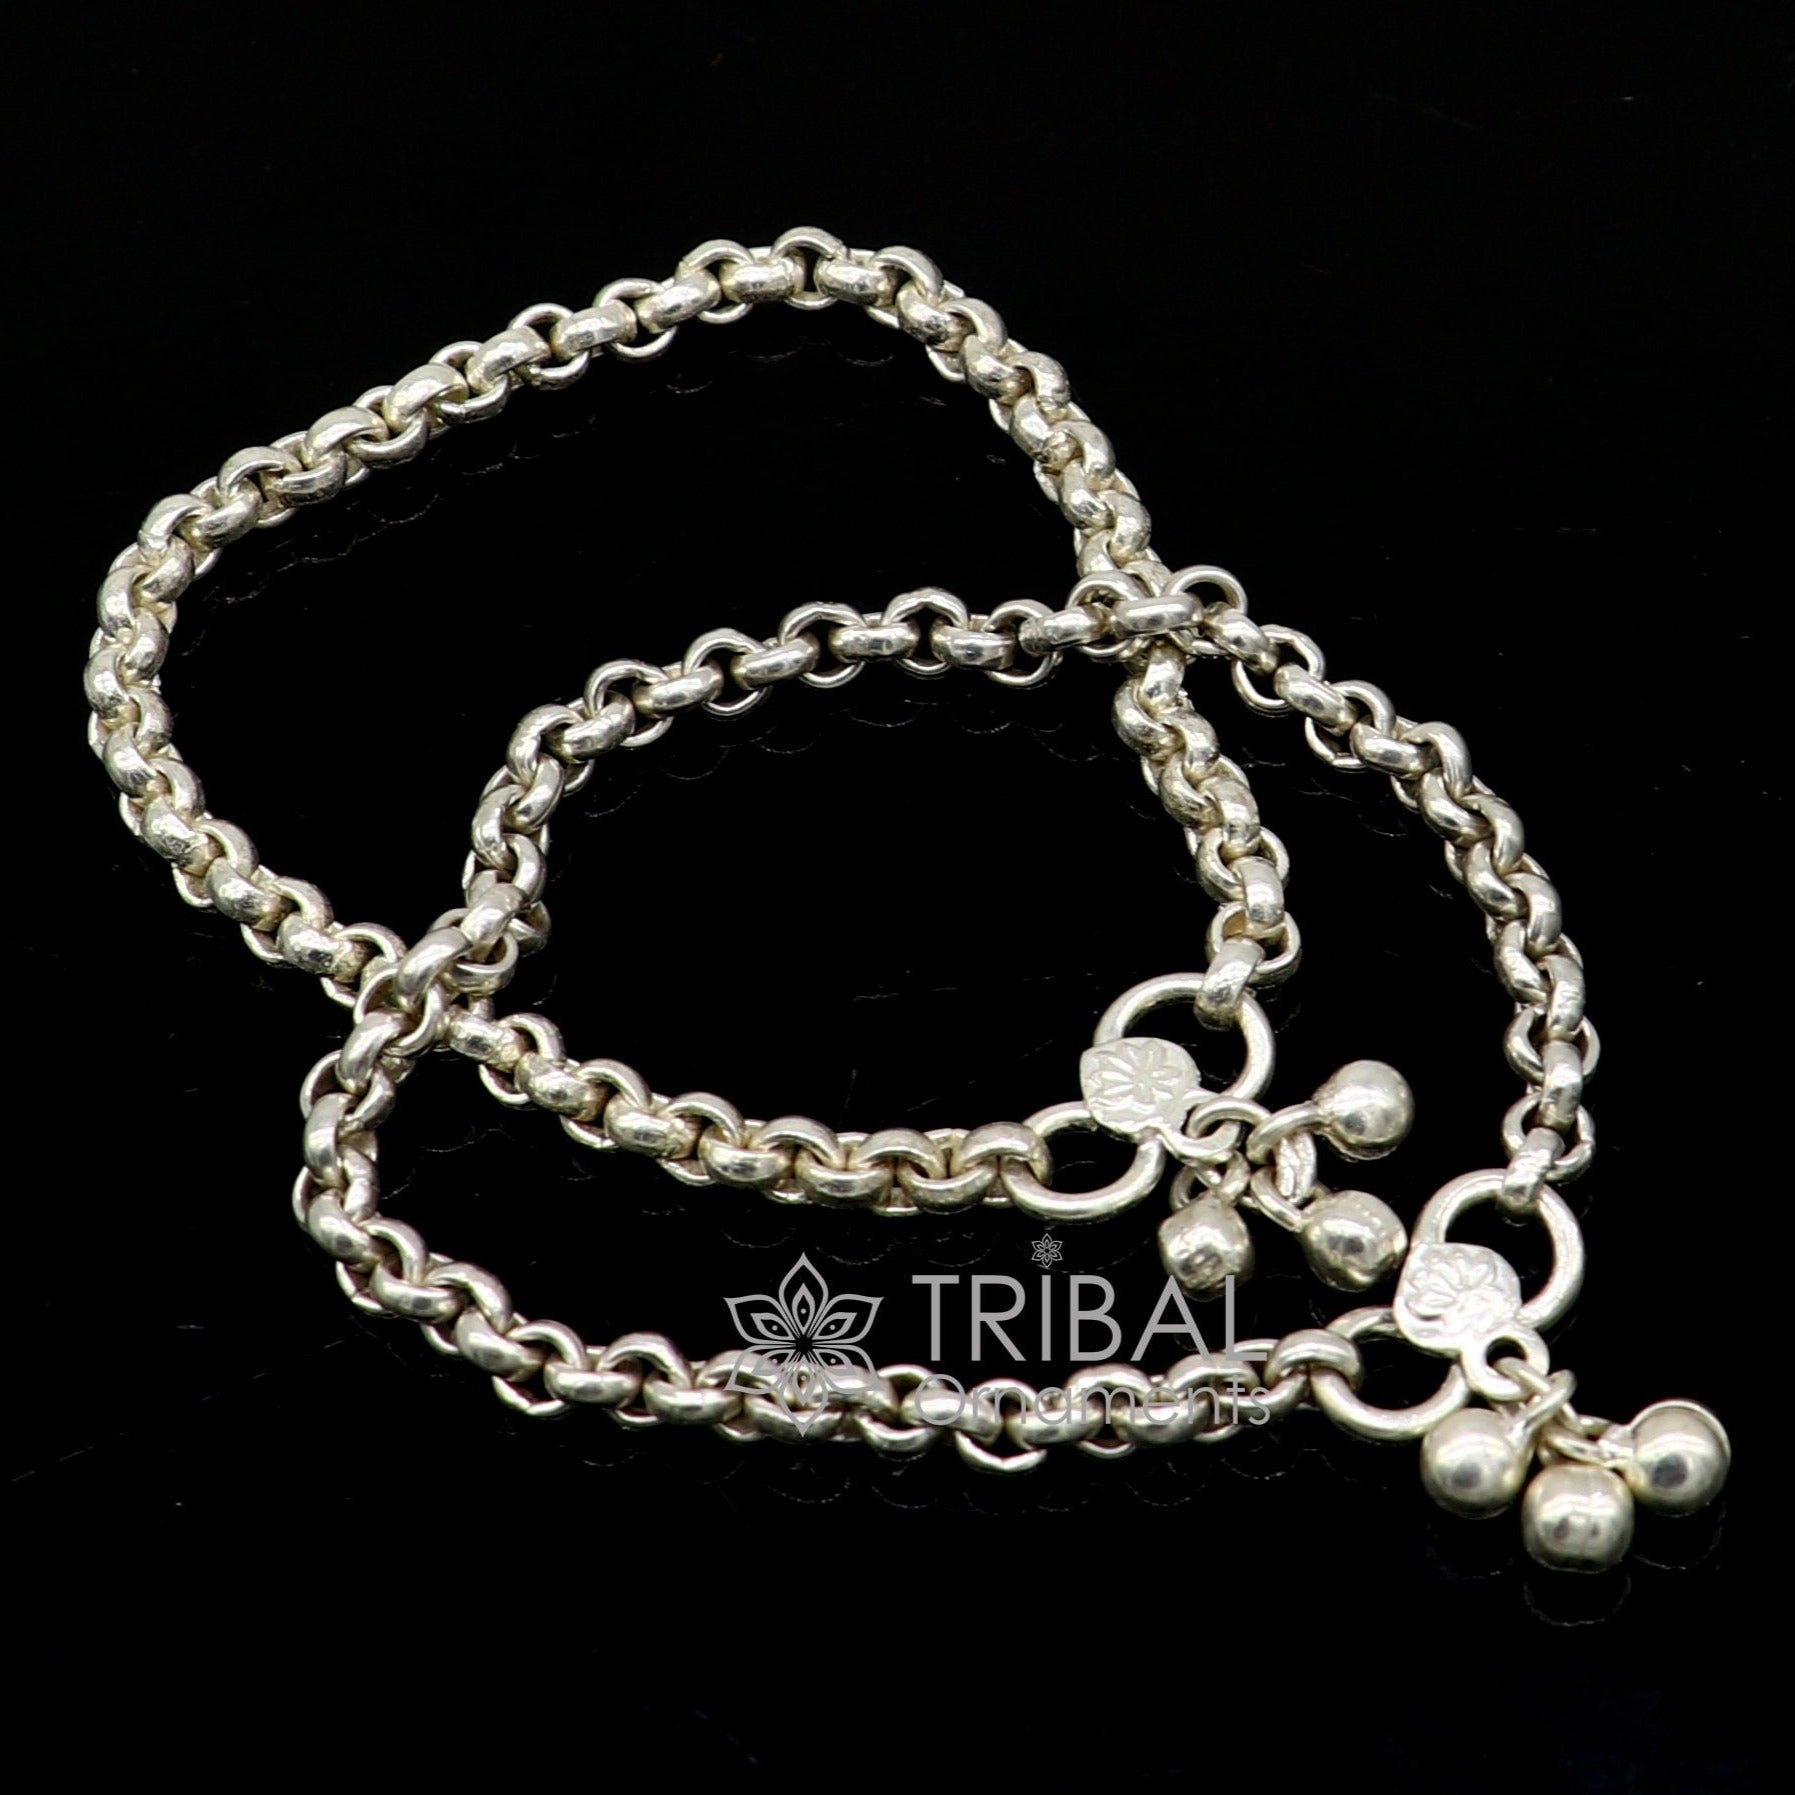 All sizes 925 sterling silver rolo chain anklets Sparkling Sterling silver Anklets pair for kids and women's,Delicate Silver Chain ank580 - TRIBAL ORNAMENTS